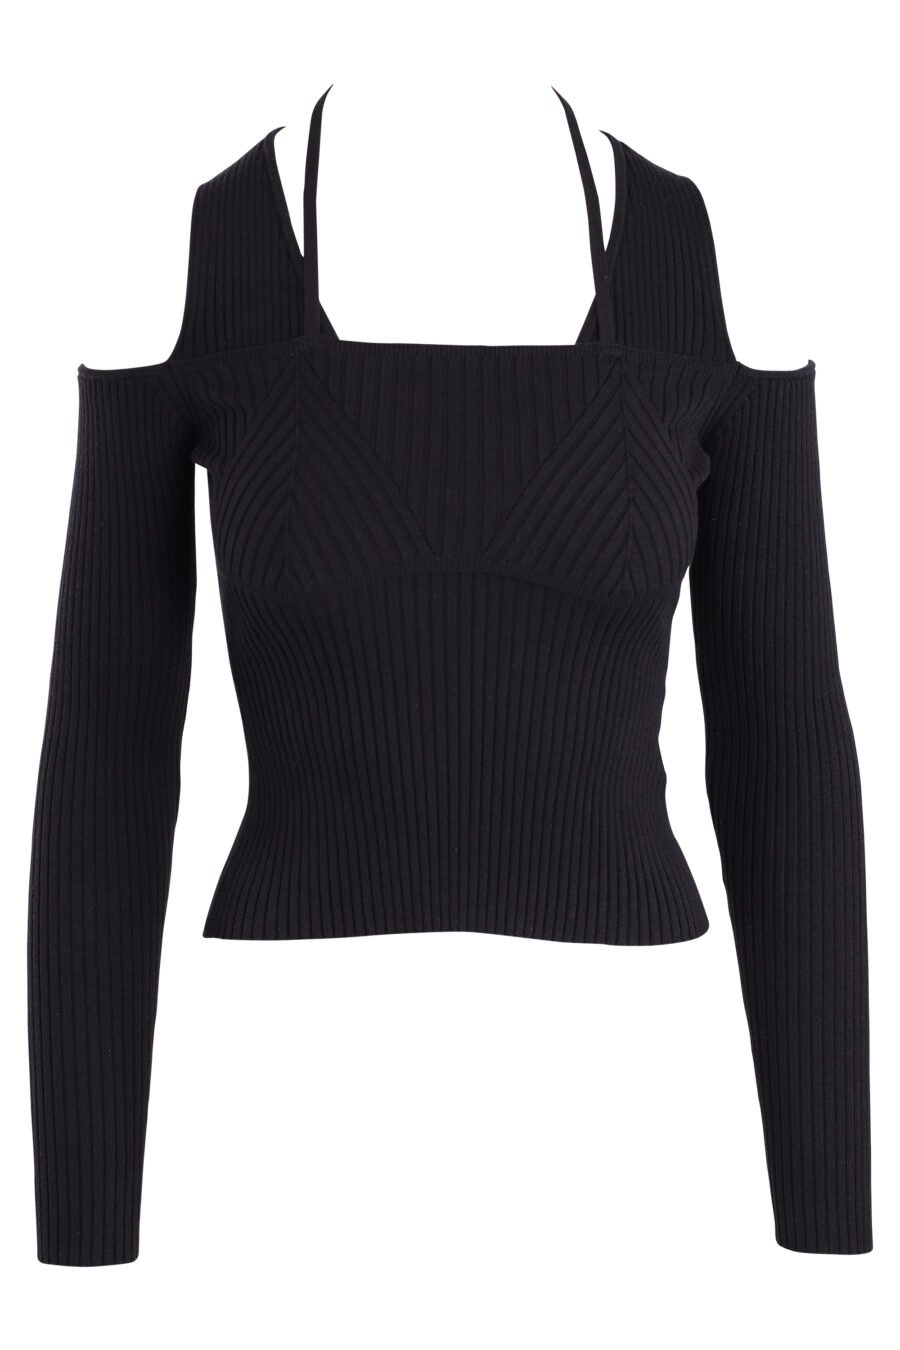 Black jumper with crossed straps and open shoulders - IMG 3346